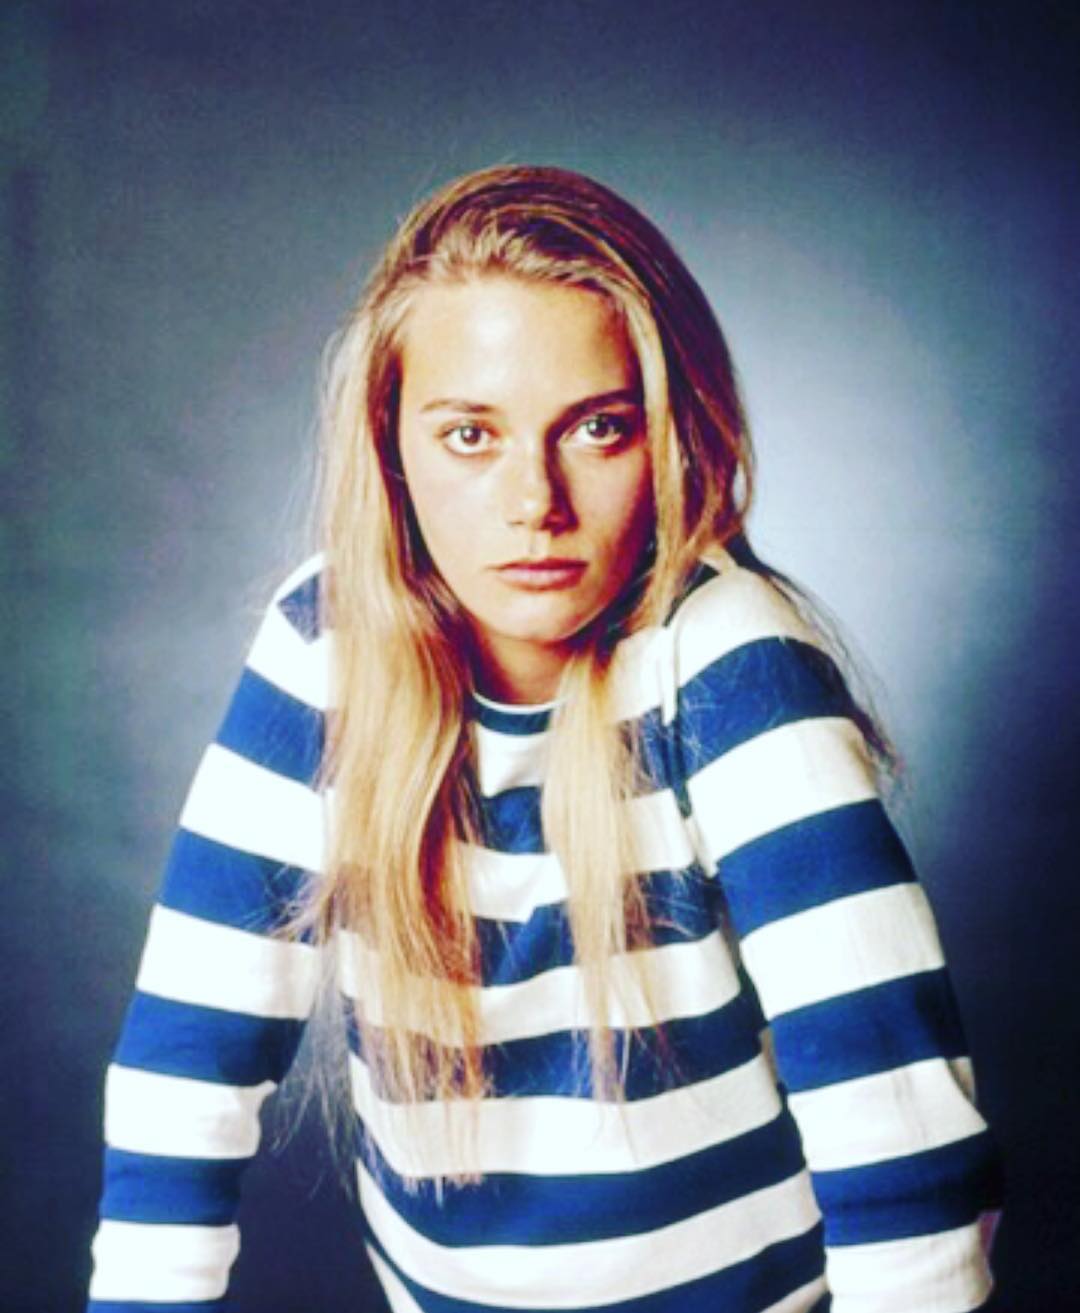 49 Hot Pictures Of Peggy Lipton Are So Damn Sexy That We Don’t Deserve Her | Best Of Comic Books